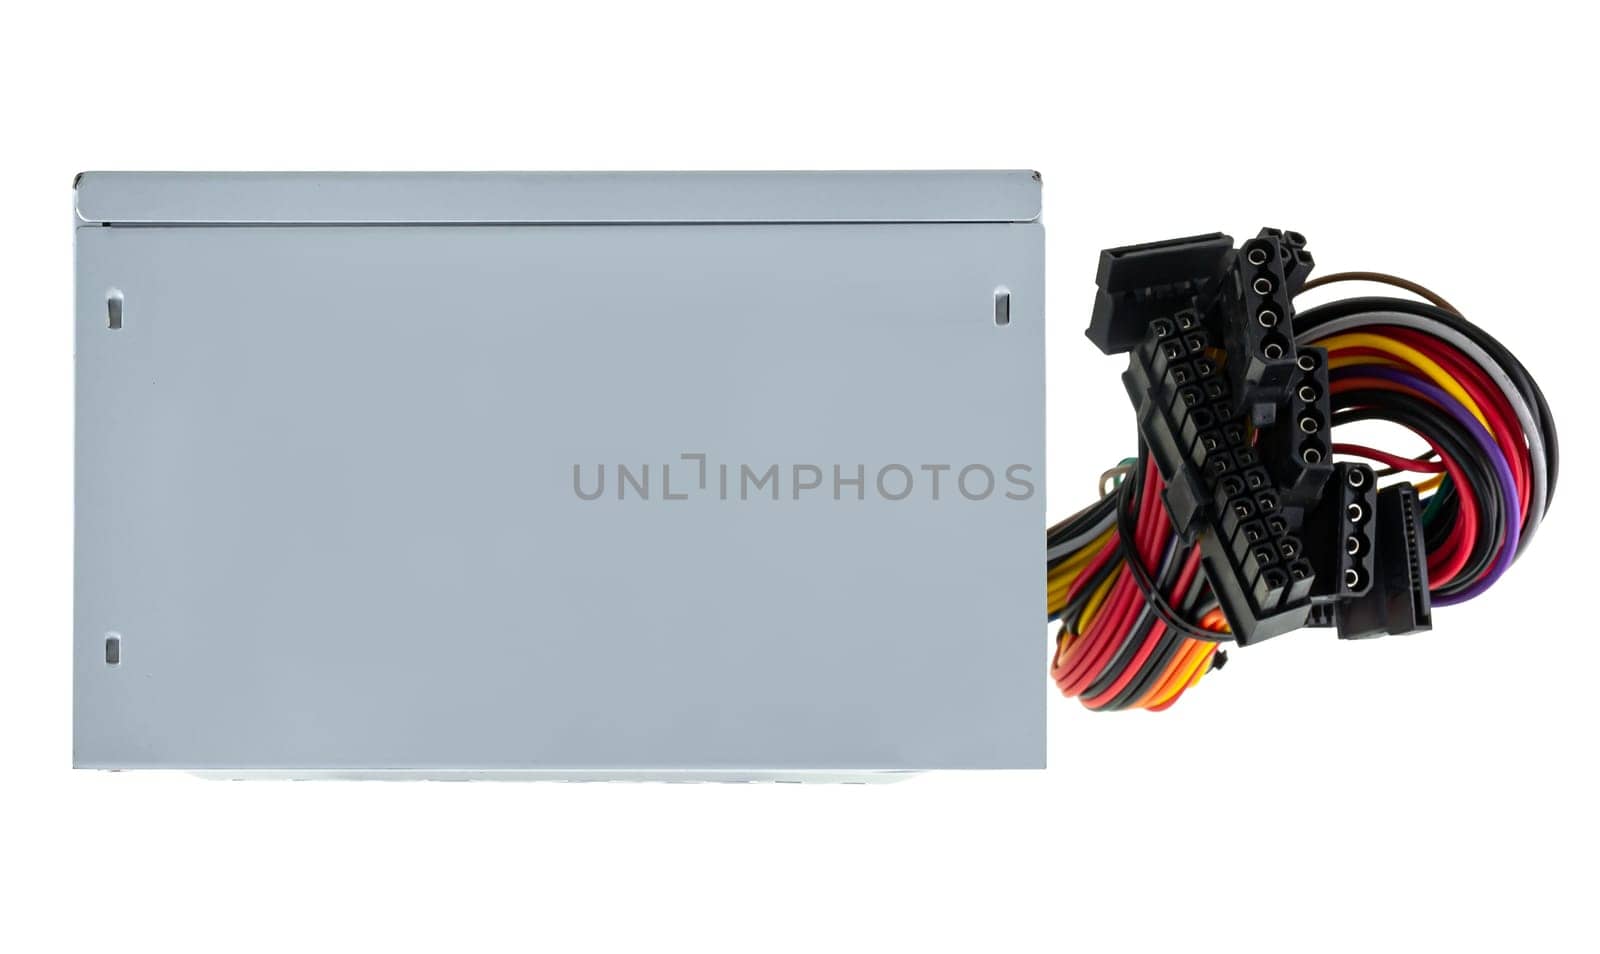 computer power supply on white background in insulation